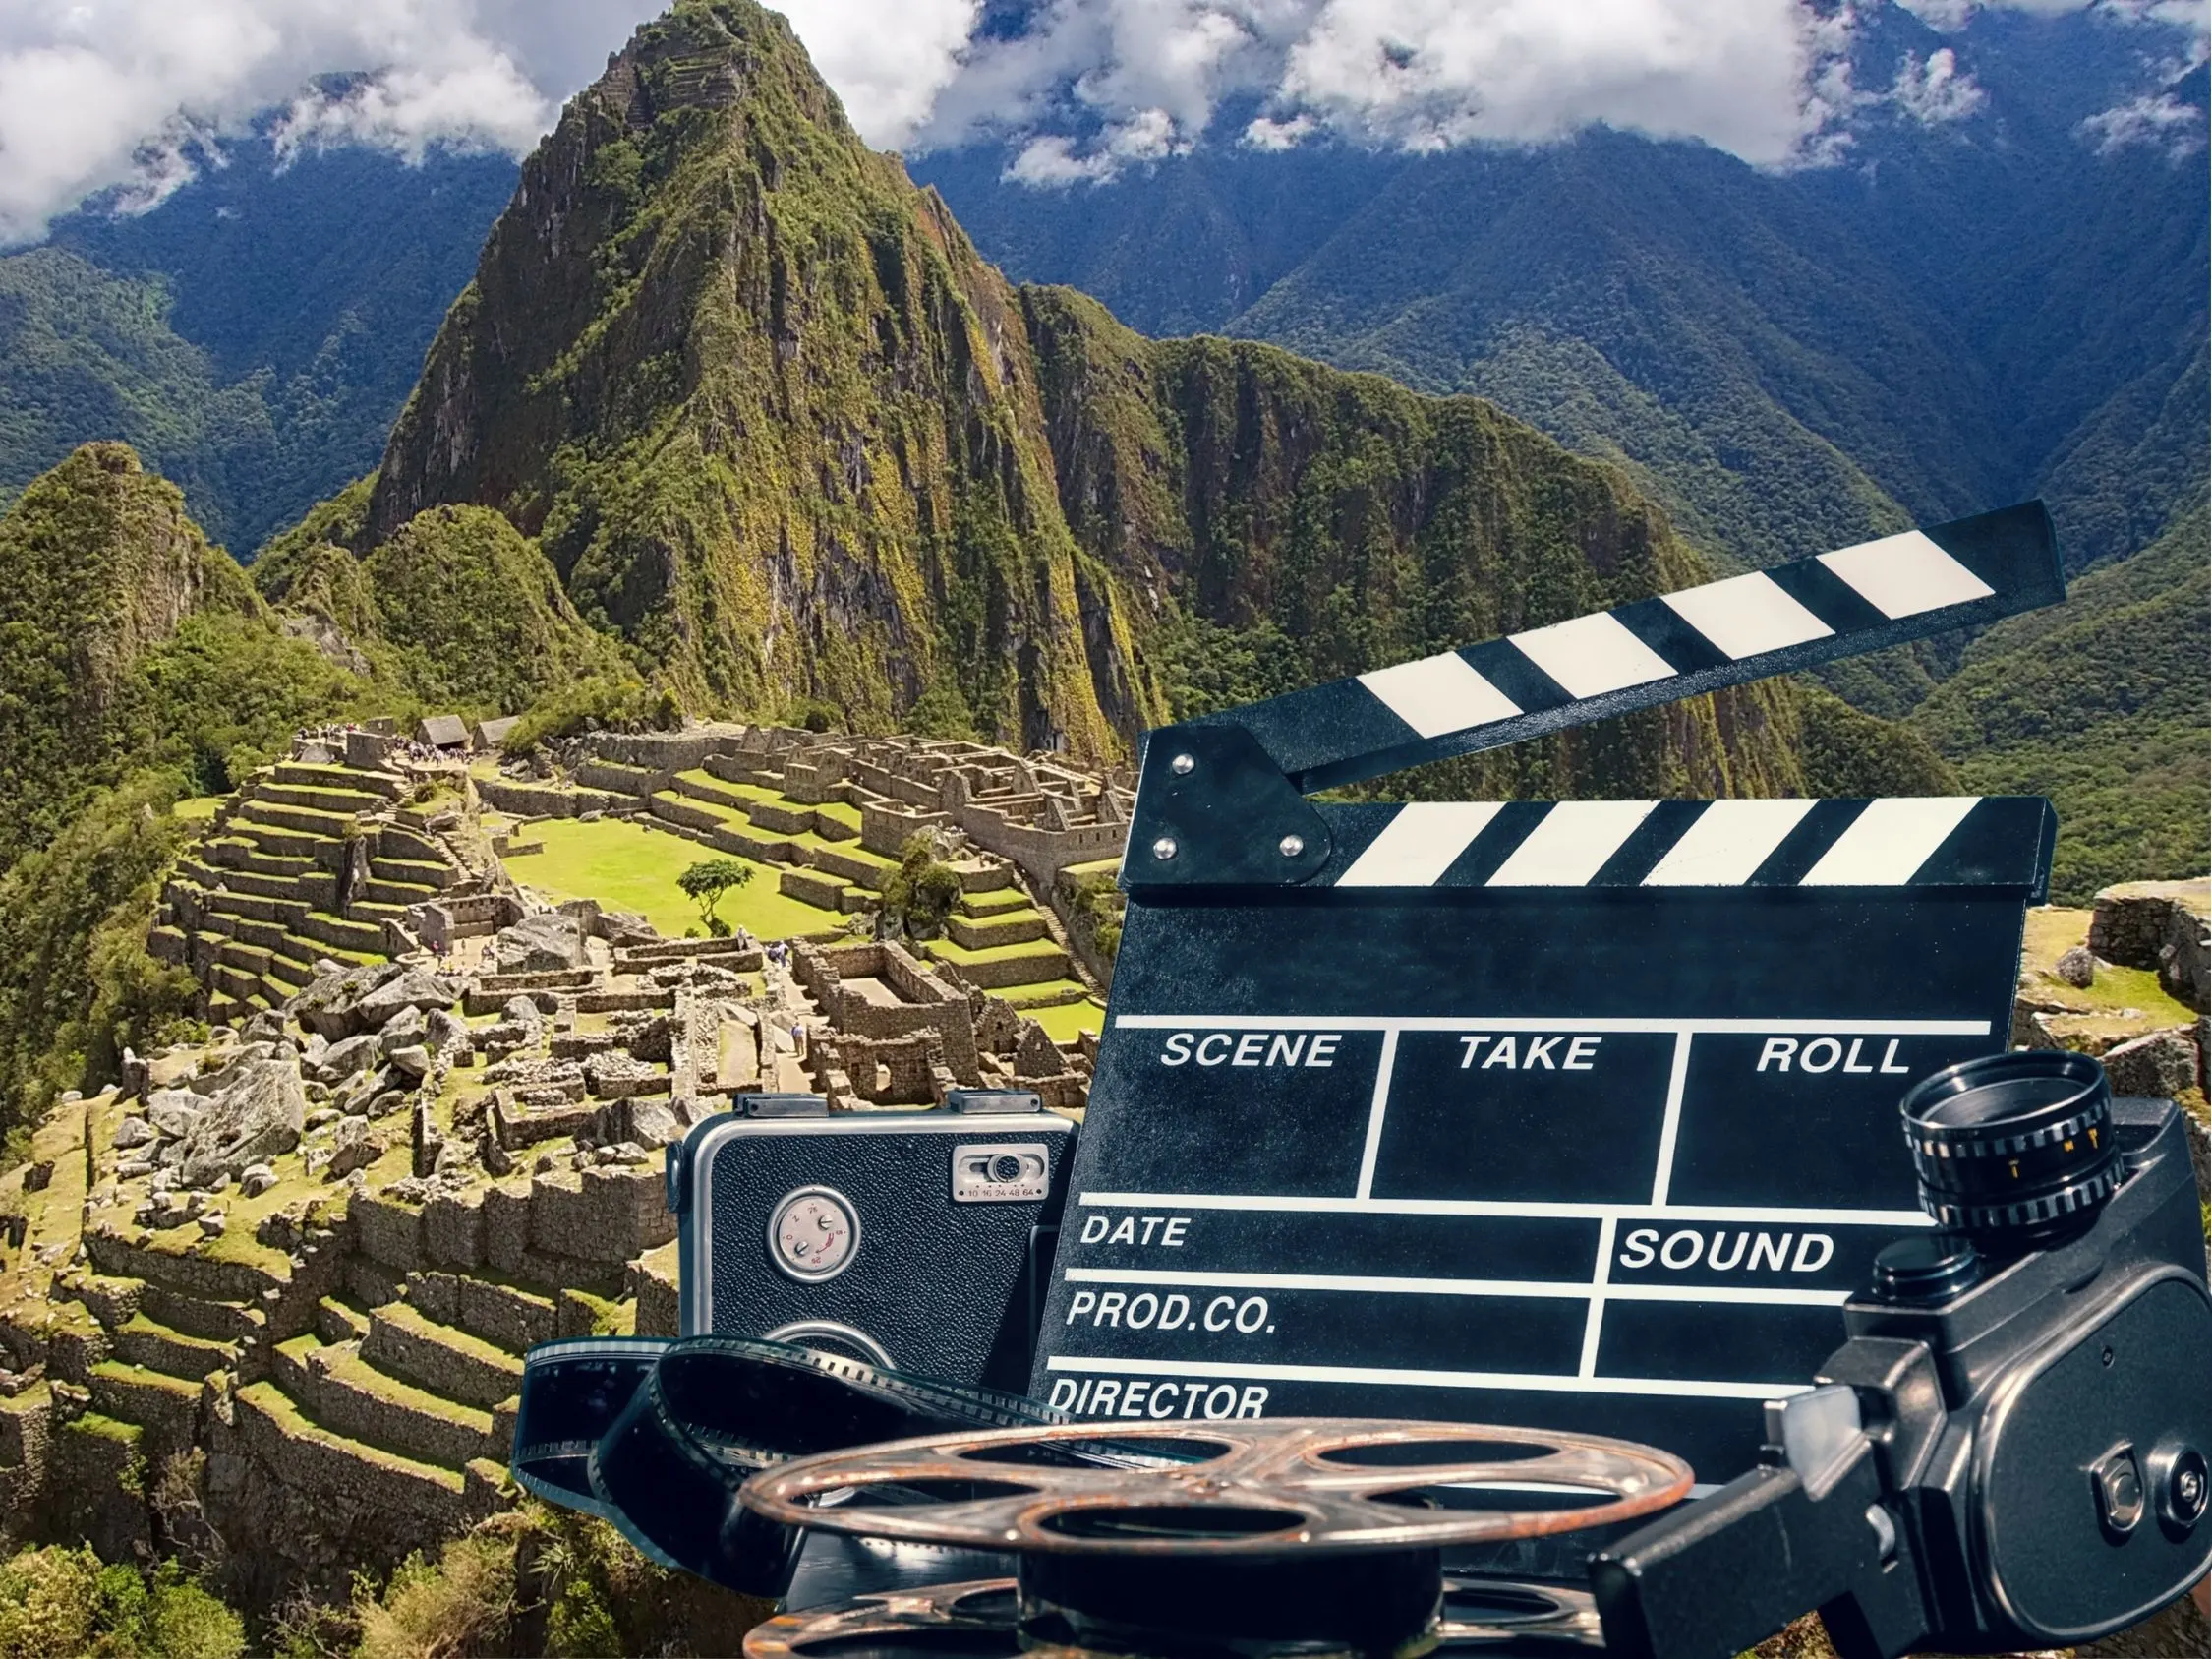 xtraordinary Movies Set In Peru That Will Inspire You To Visit!